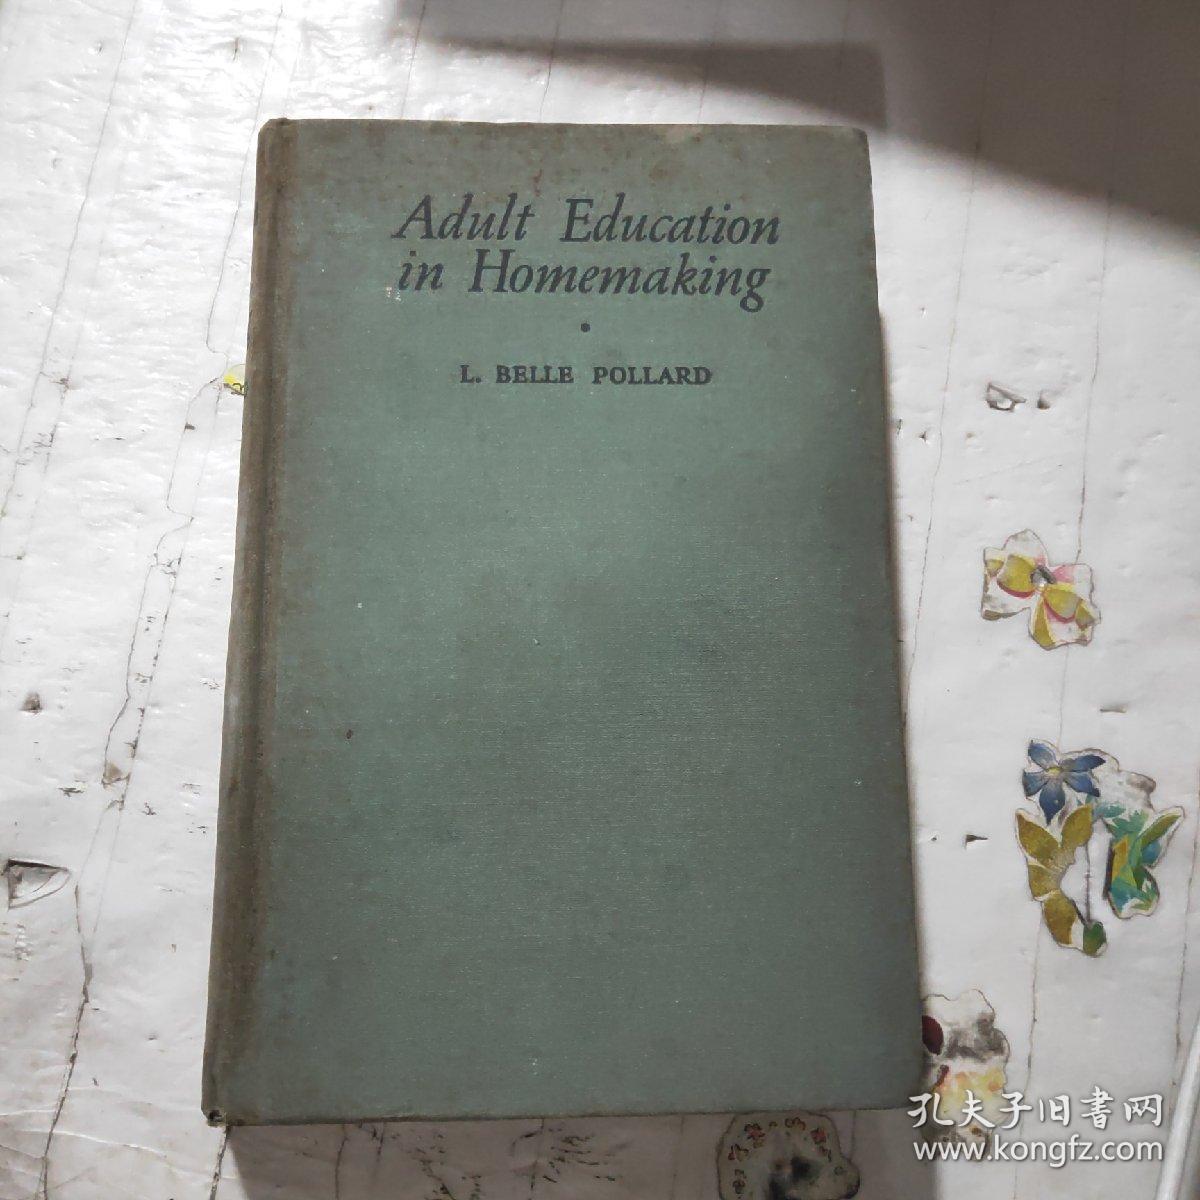 ADULT EDUCATION IN HOMEMAKING